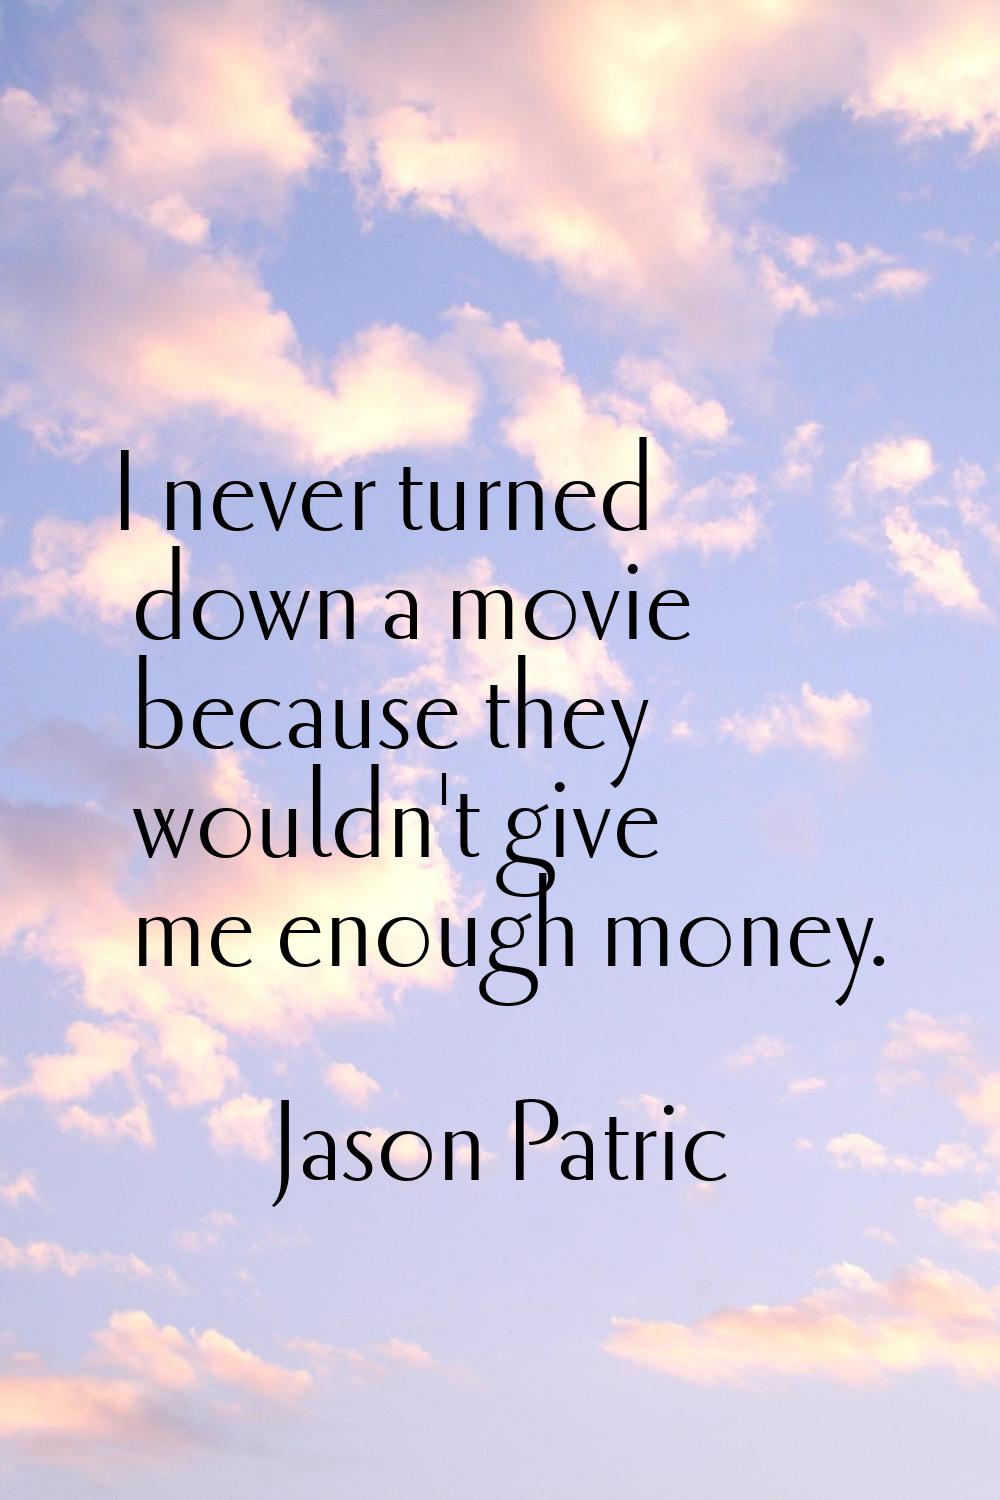 I never turned down a movie because they wouldn't give me enough money.